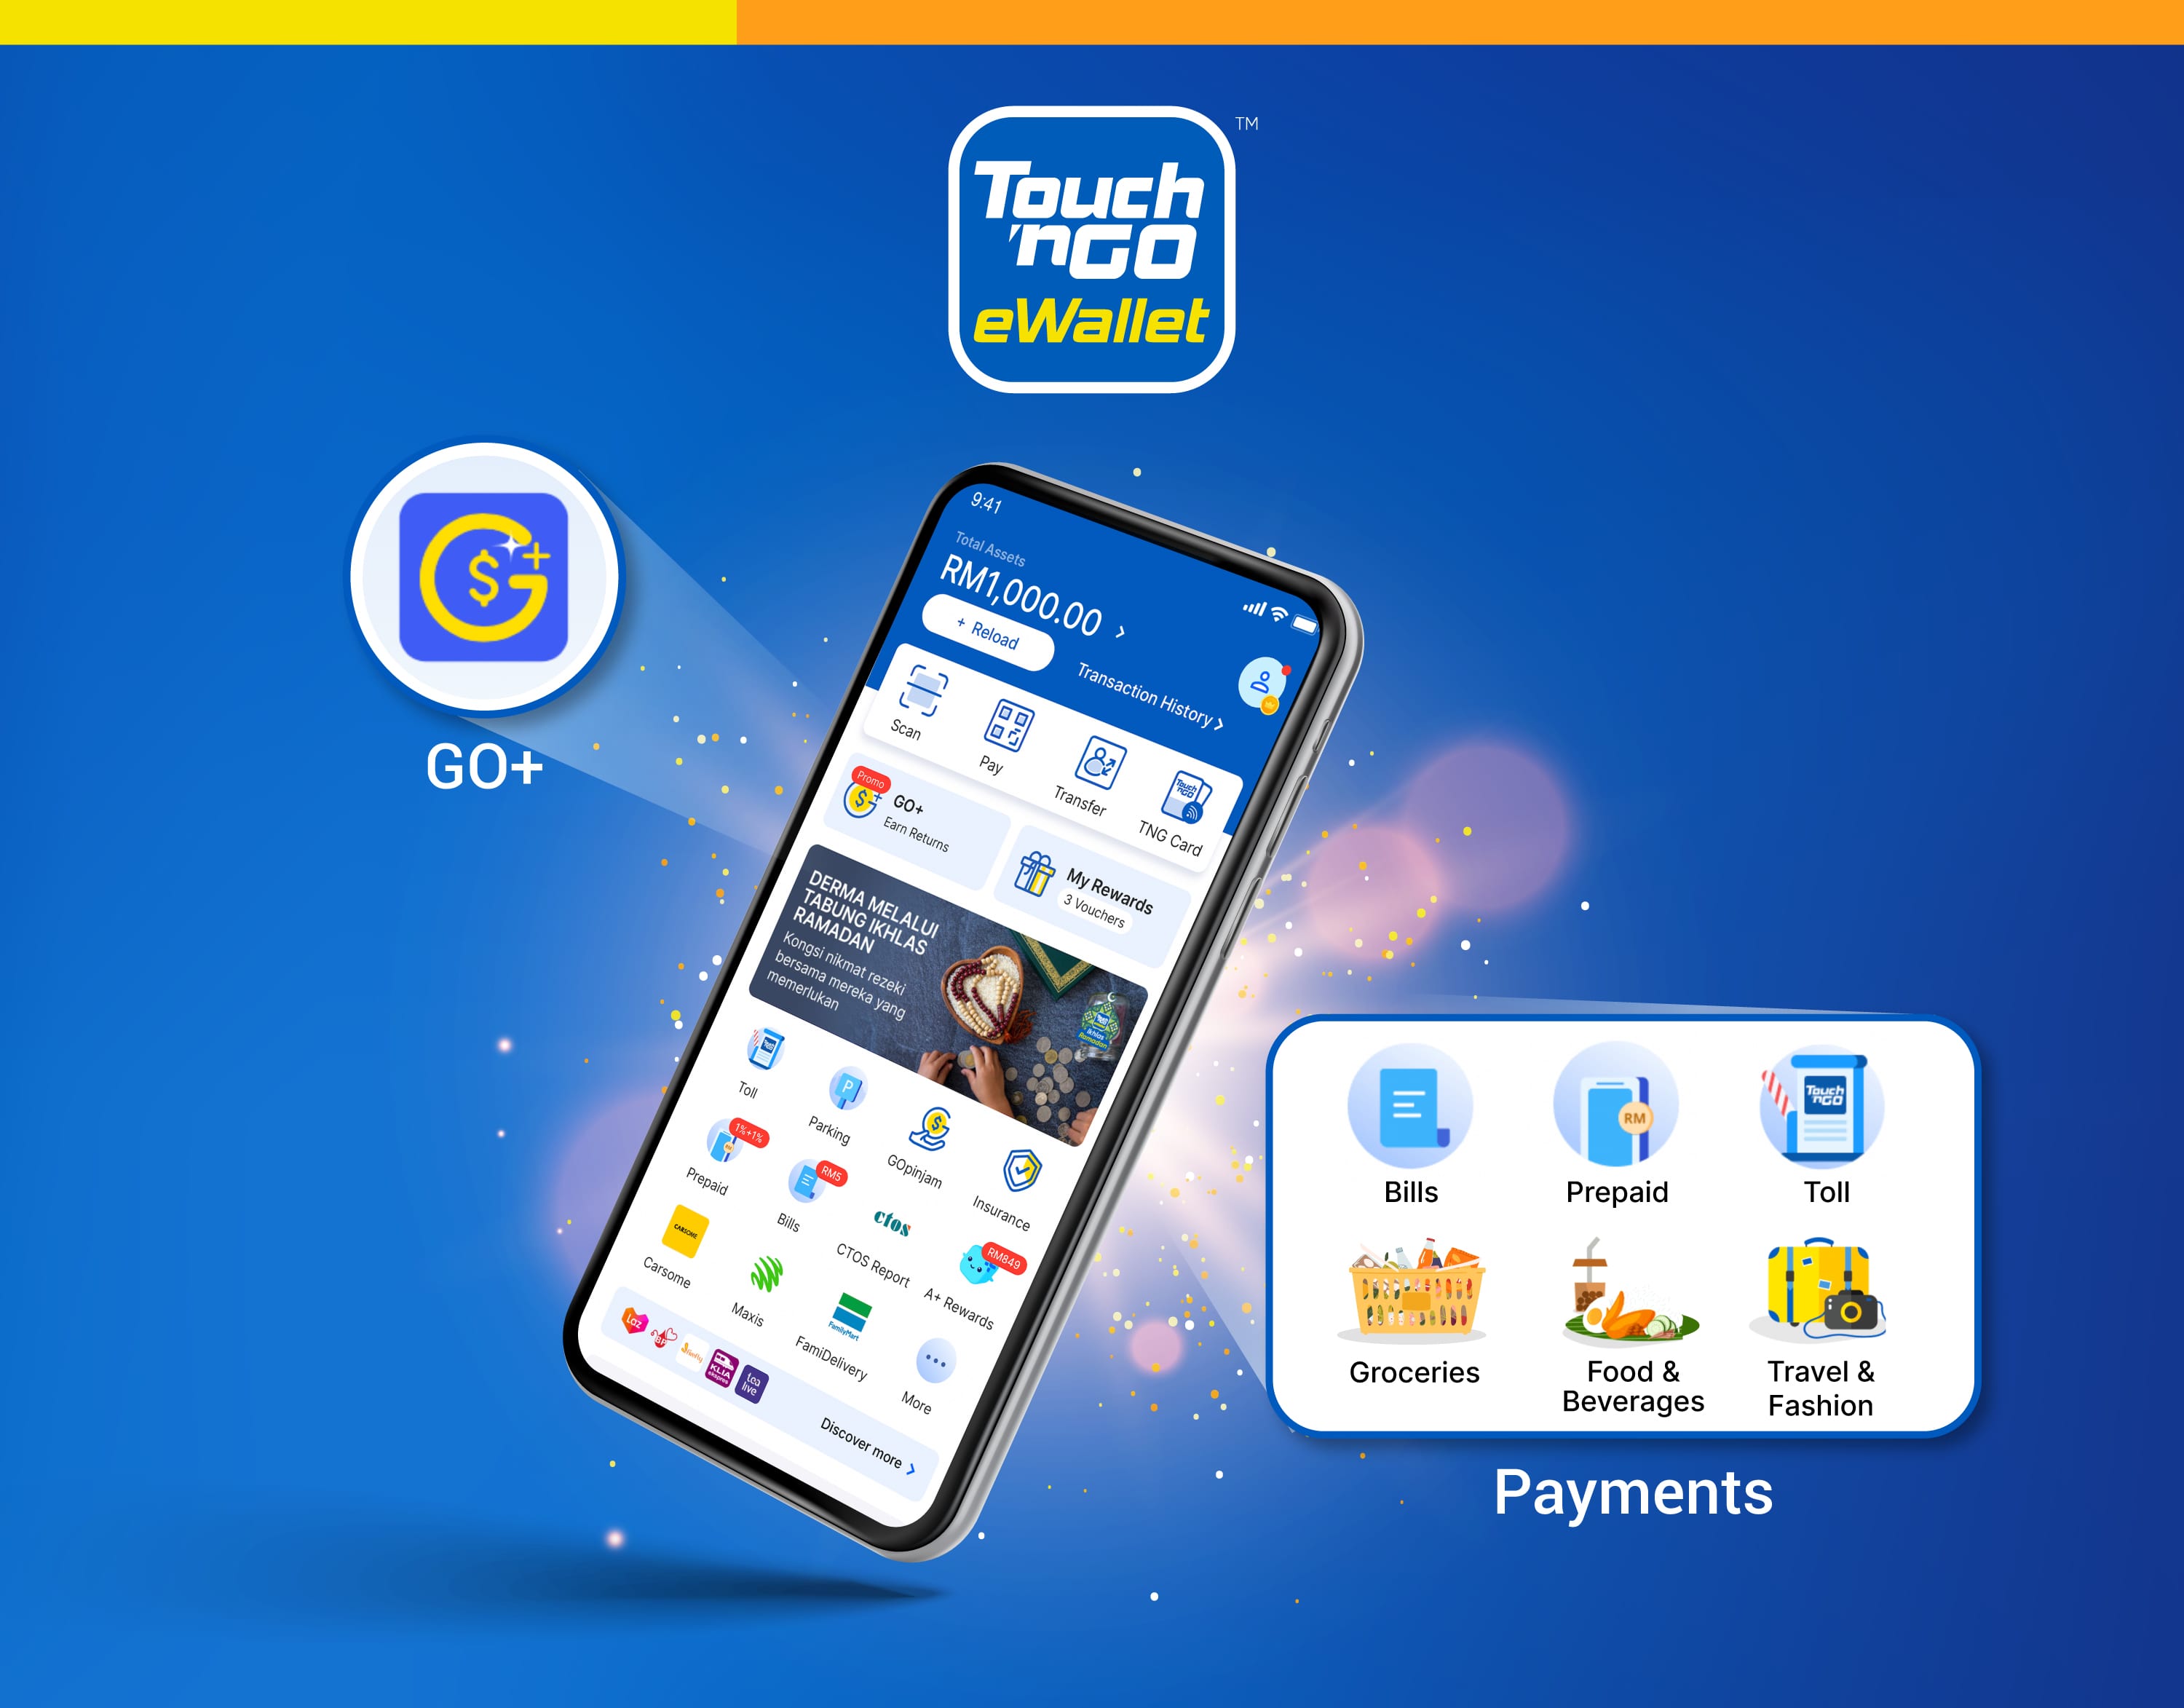 TNG Digital Sdn Bhd’s Touch ‘n Go eWallet sets its mark in fintech with two wins in the Malaysia Technology Excellence Awards